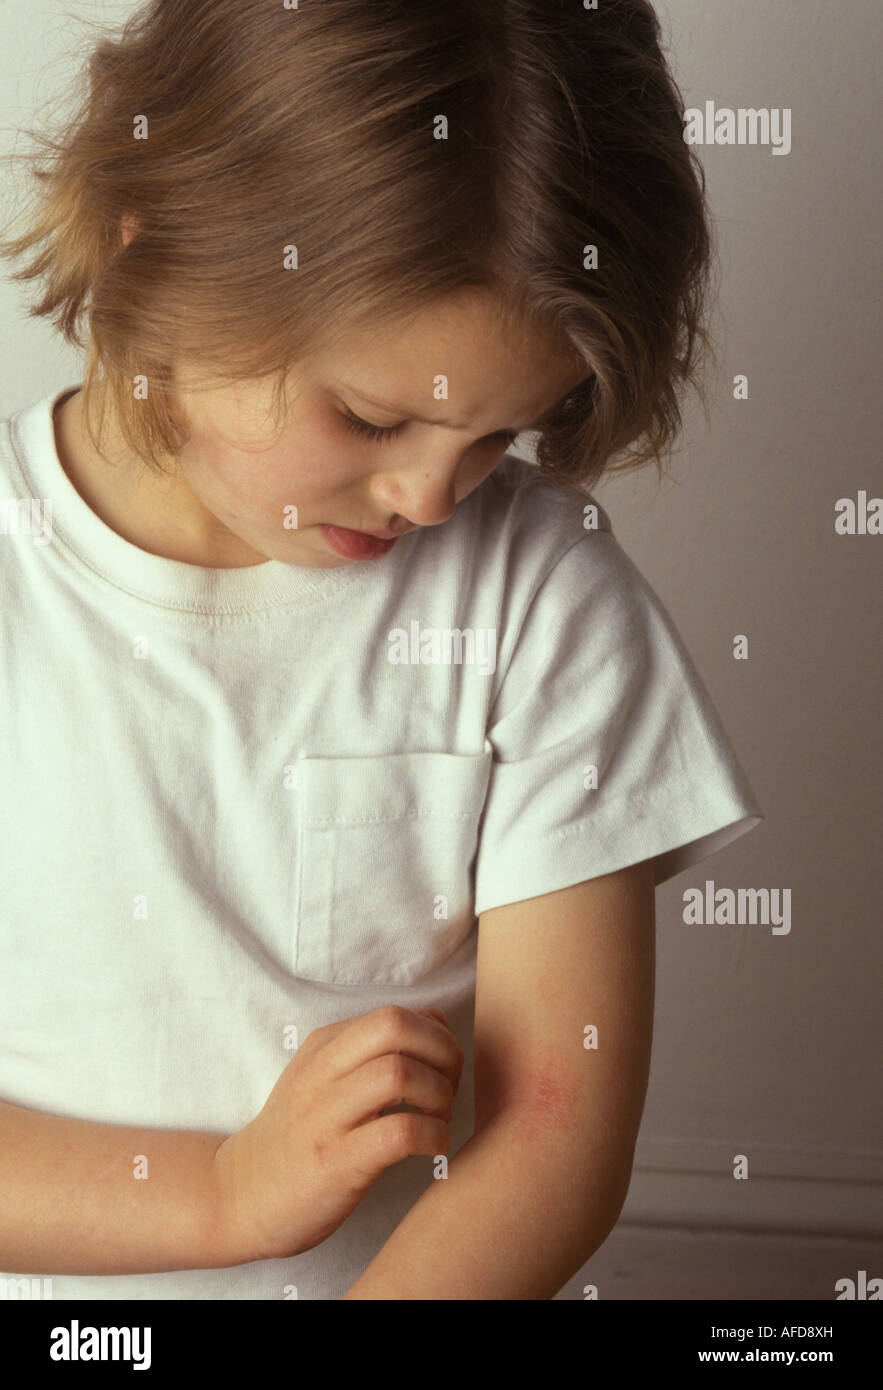 child scratching her eczema in the fold of her elbow Stock Photo